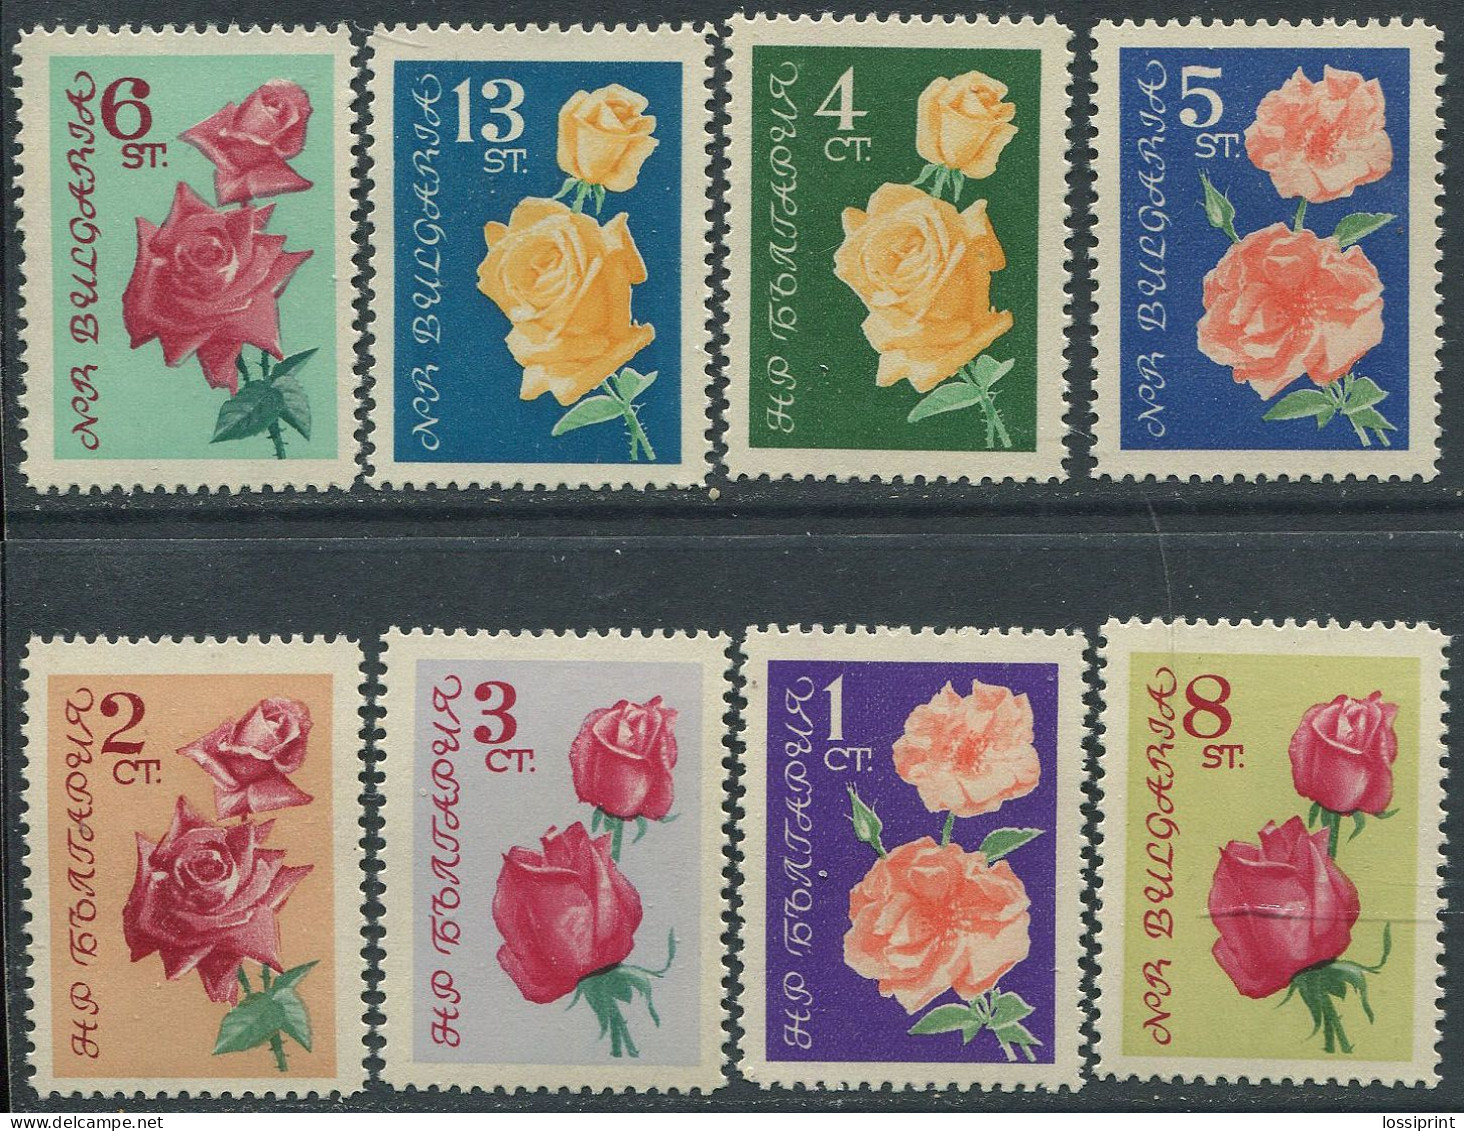 Bulgaria:Unused Stamps Serie Flowers, Roses, 1962, MNH - Rozen